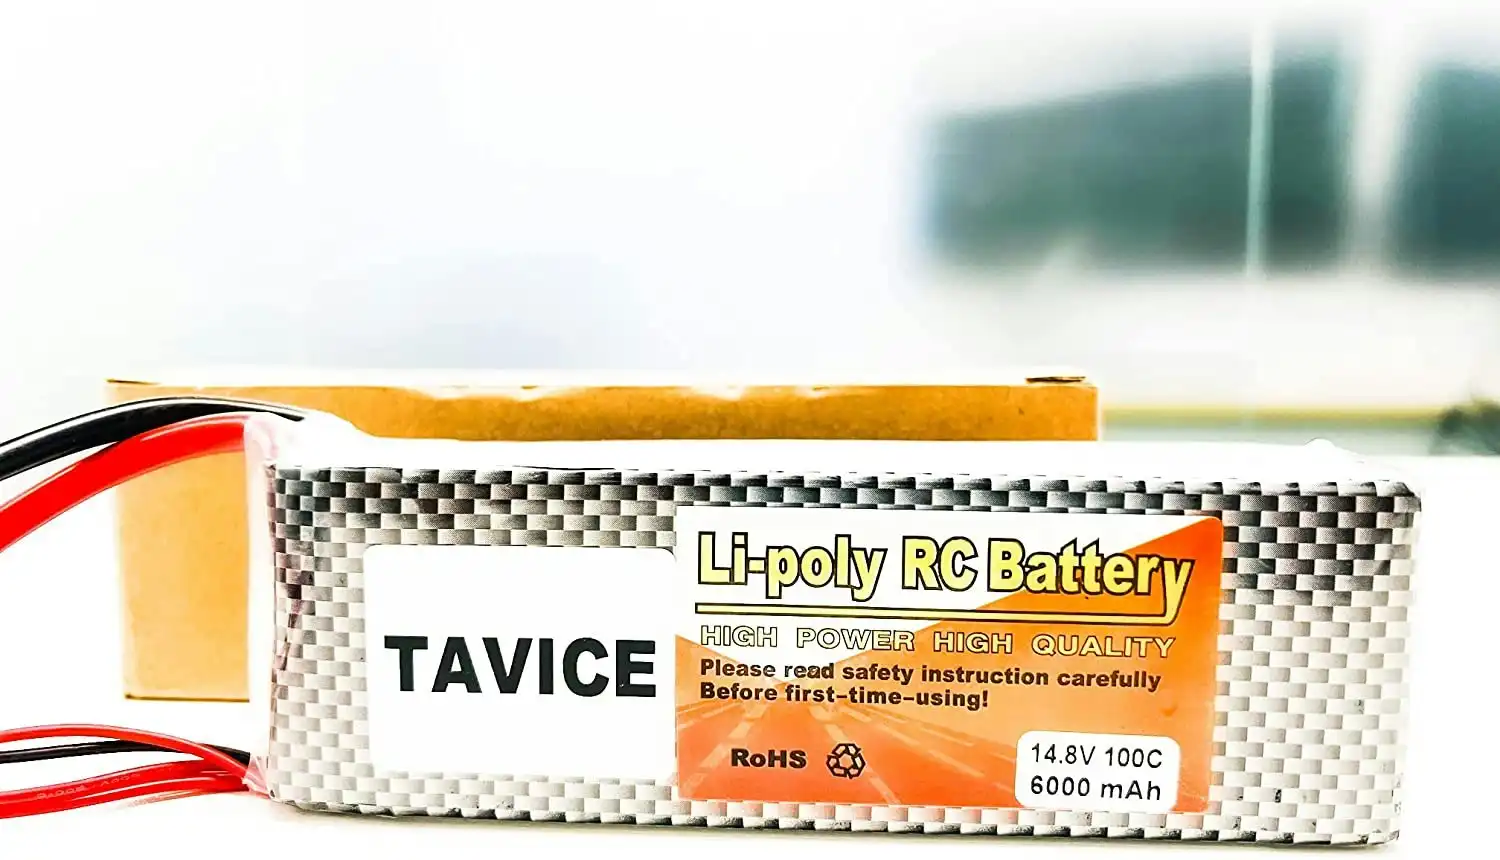 Tavice 4S Lipo Battery 6000mAh 14.8V 100C with EC5 Plug Soft Case for RC Plane Quadcopter Airplane Helicopter RC Car Truck RC Boat